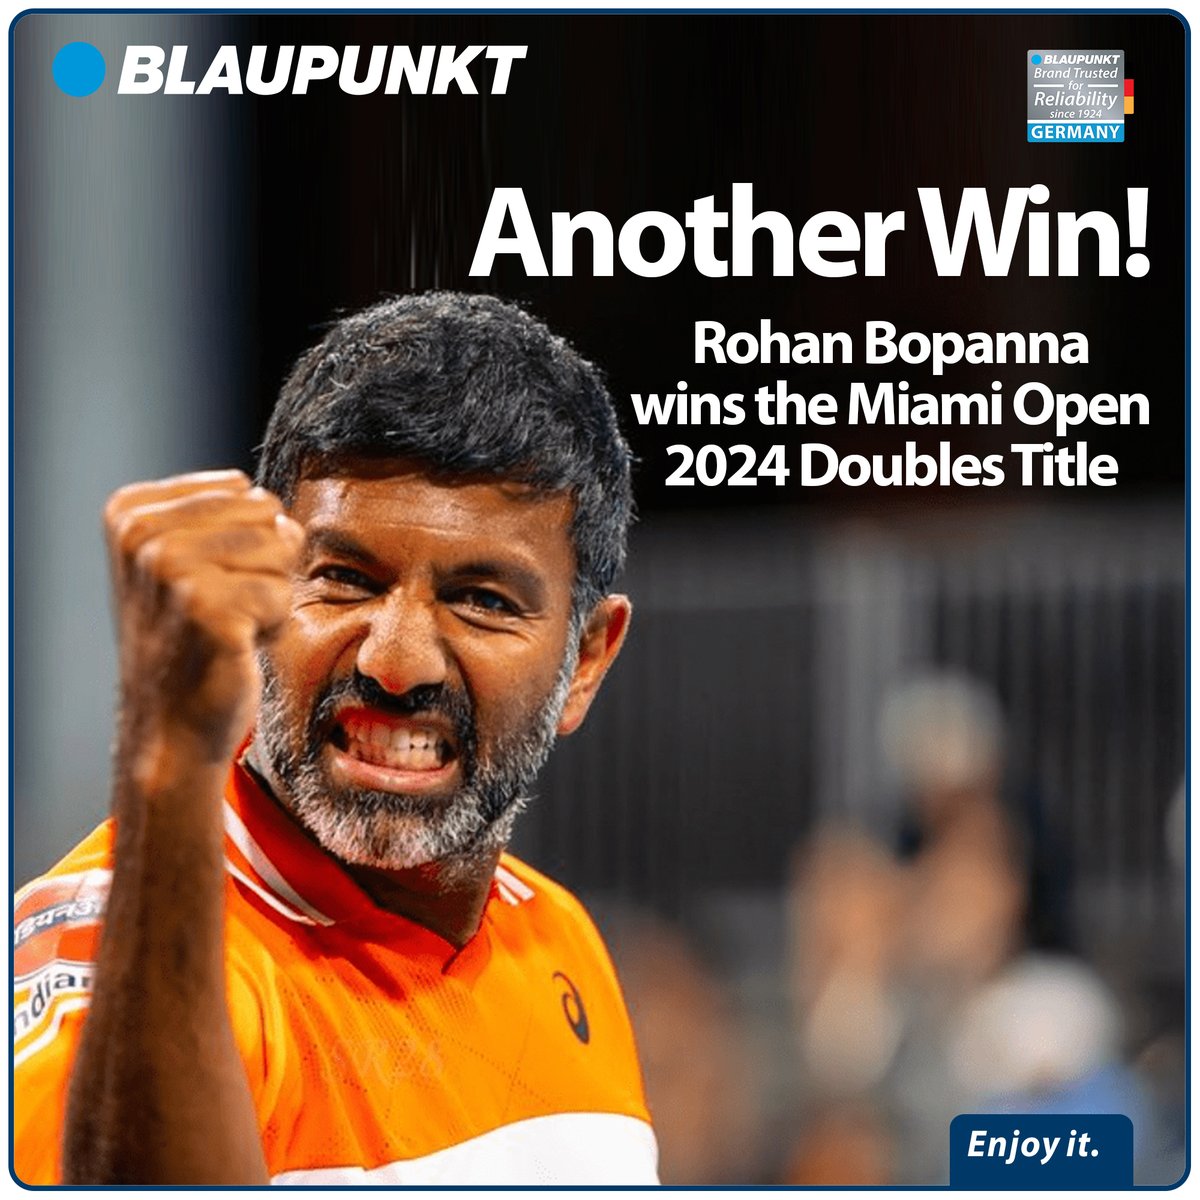 Age is just a number! It is all in the mind. @rohanbopanna proves this daily. At 44 he is playing at the highest level and #winning. Now that is a combination of pure talent, a willing body and a strong mind. Congrats Bopanna on the amazing Miami Open win! #RohanBopanna…